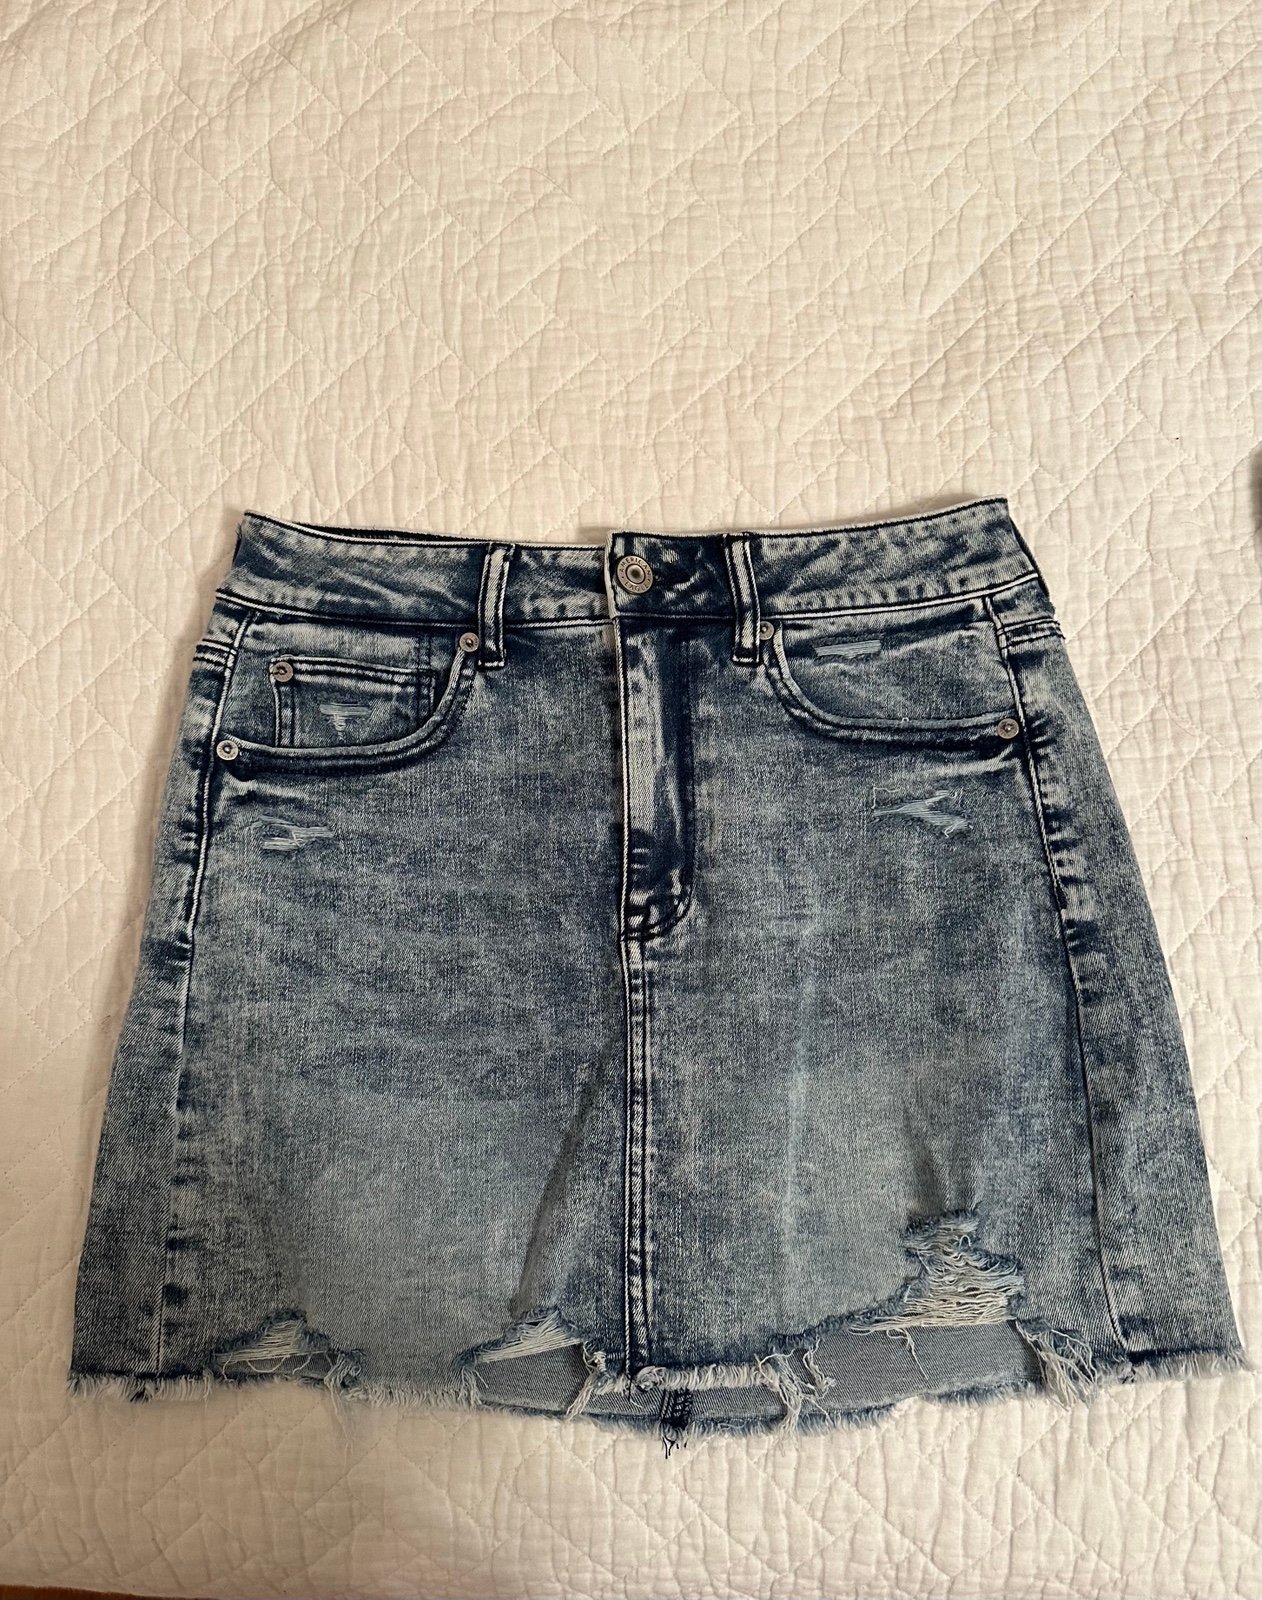 Discounted American Eagle Women’s Jean Skirt Size 8 Golr7NwS1 for sale